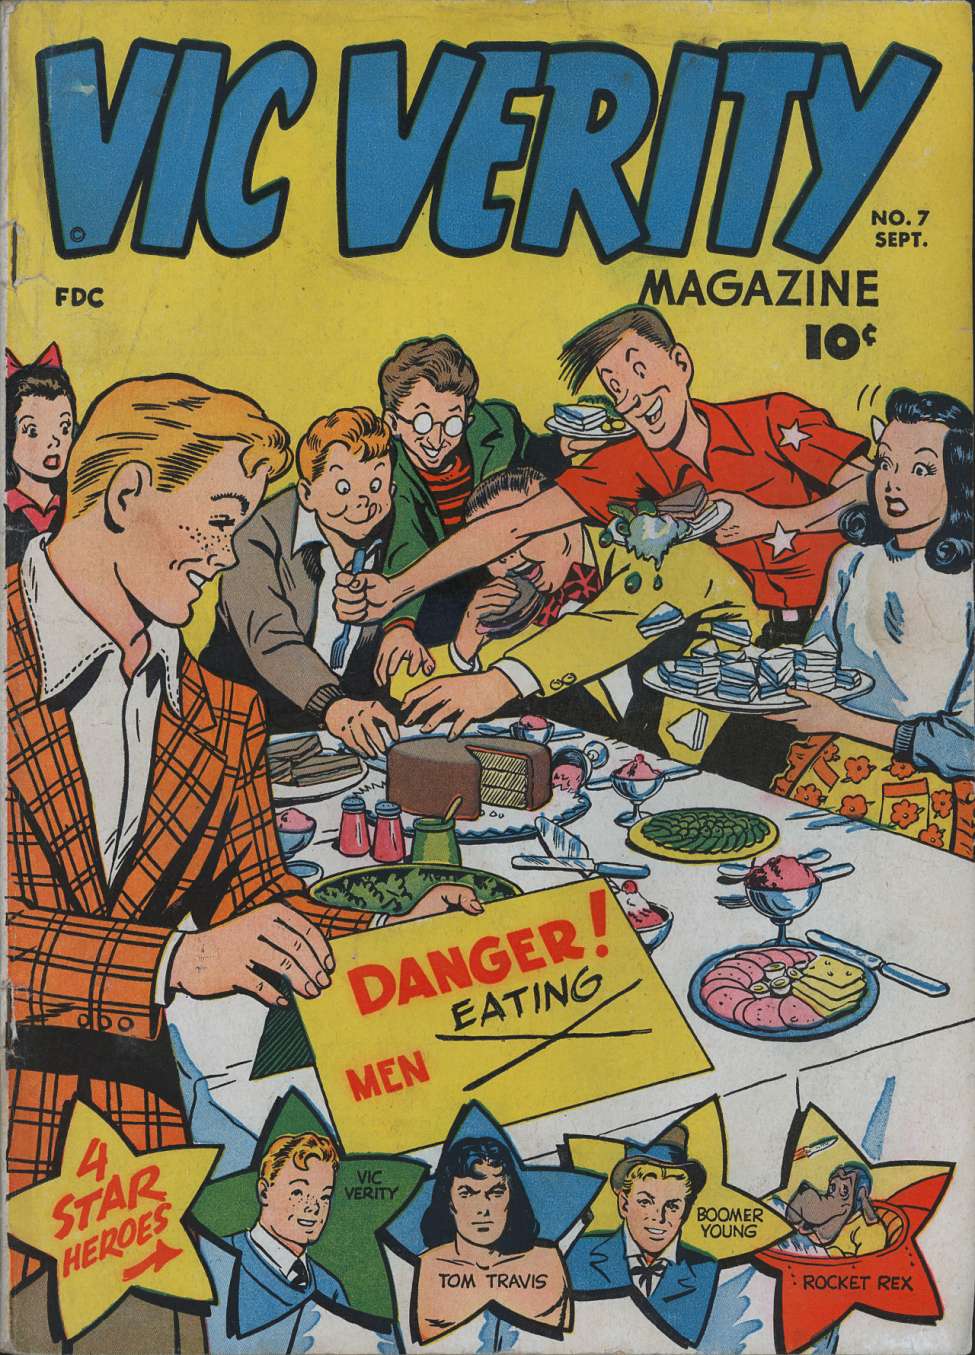 Comic Book Cover For Vic Verity Magazine 7